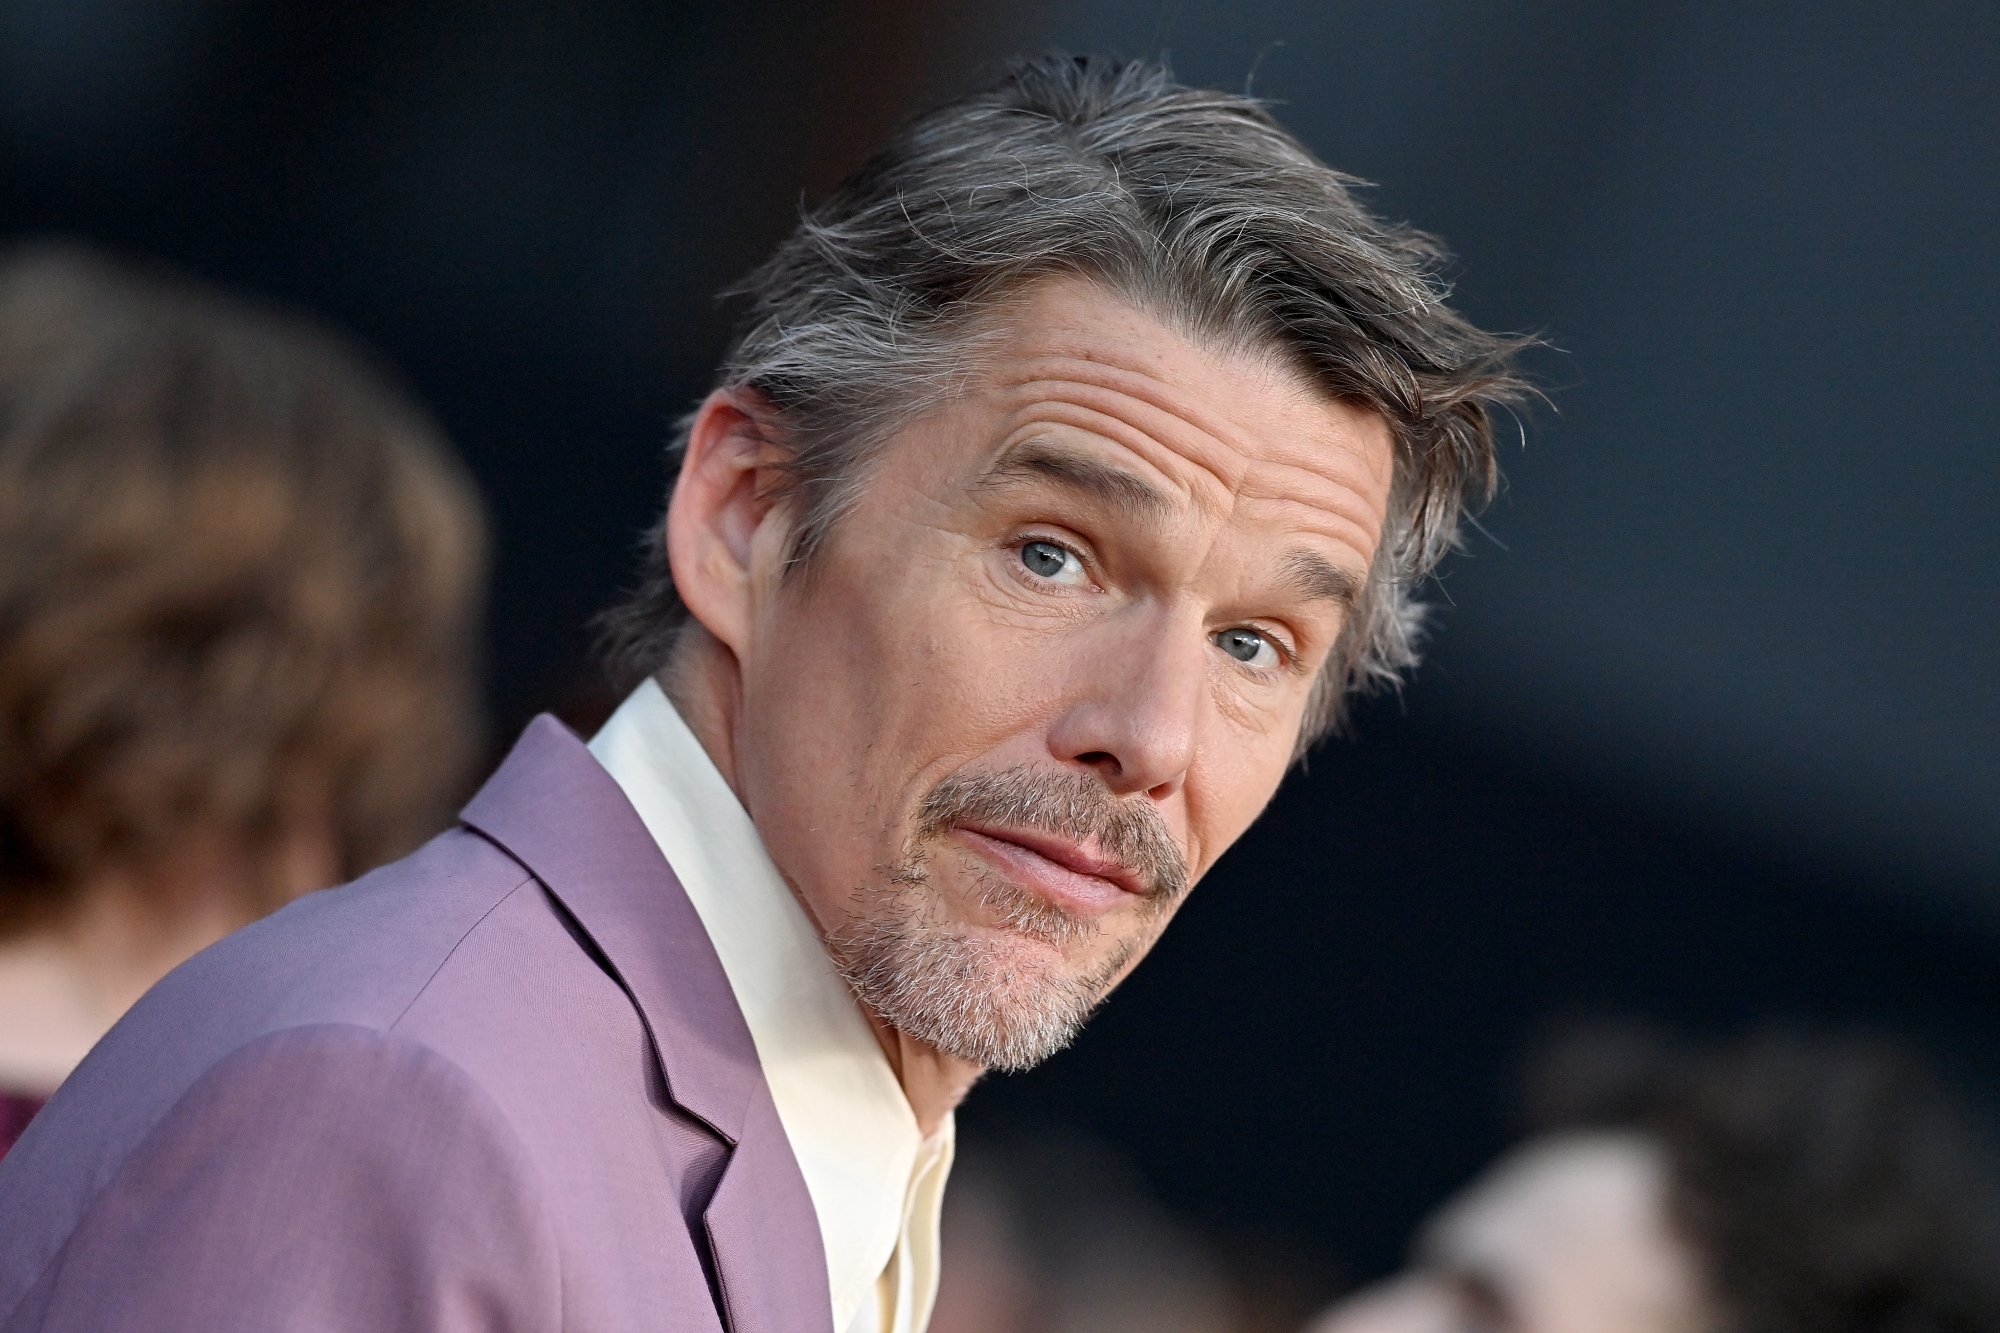 'The Black Phone' actor Ethan Hawke wearing a purple suit jacket with a slight smile looking to the side